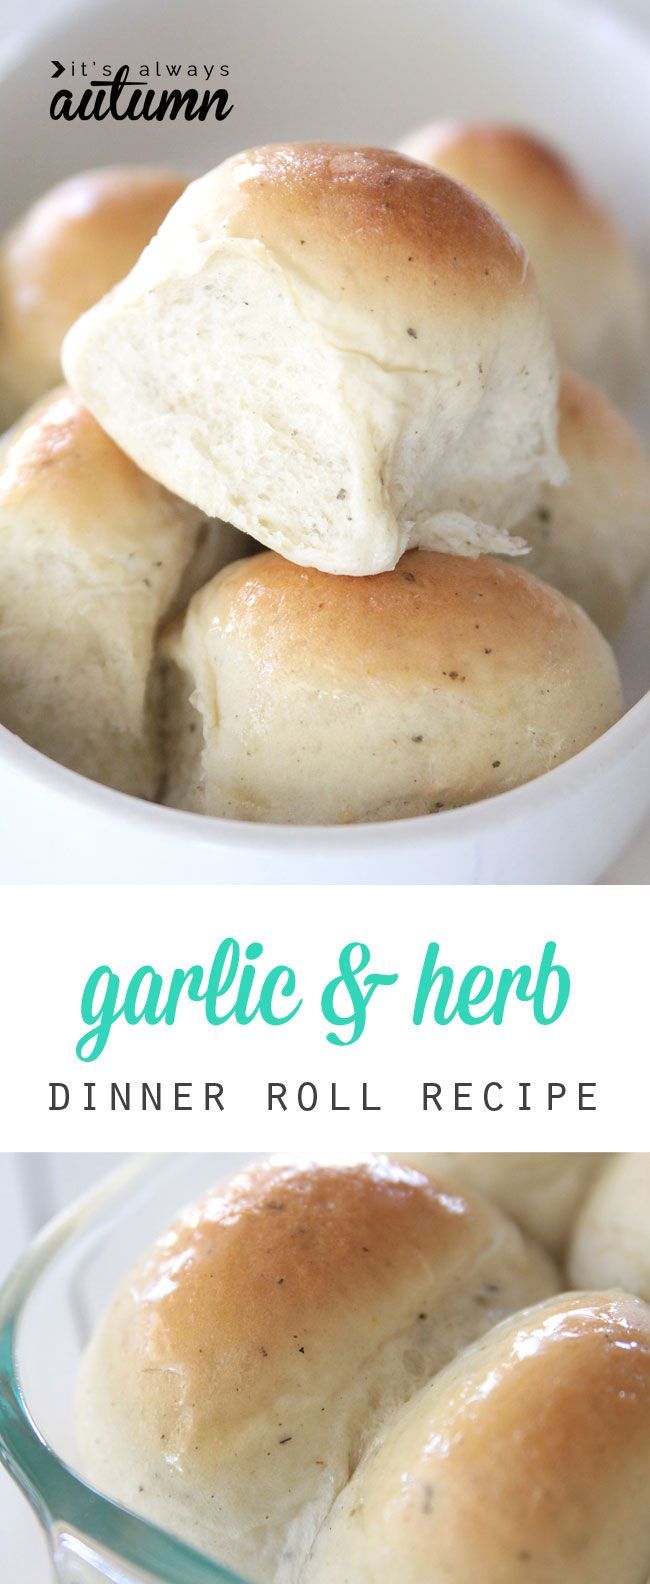 these garlic & herb dinner rolls are amazing! soft and light and flavorful and just plain good. great recipe & step by step photo